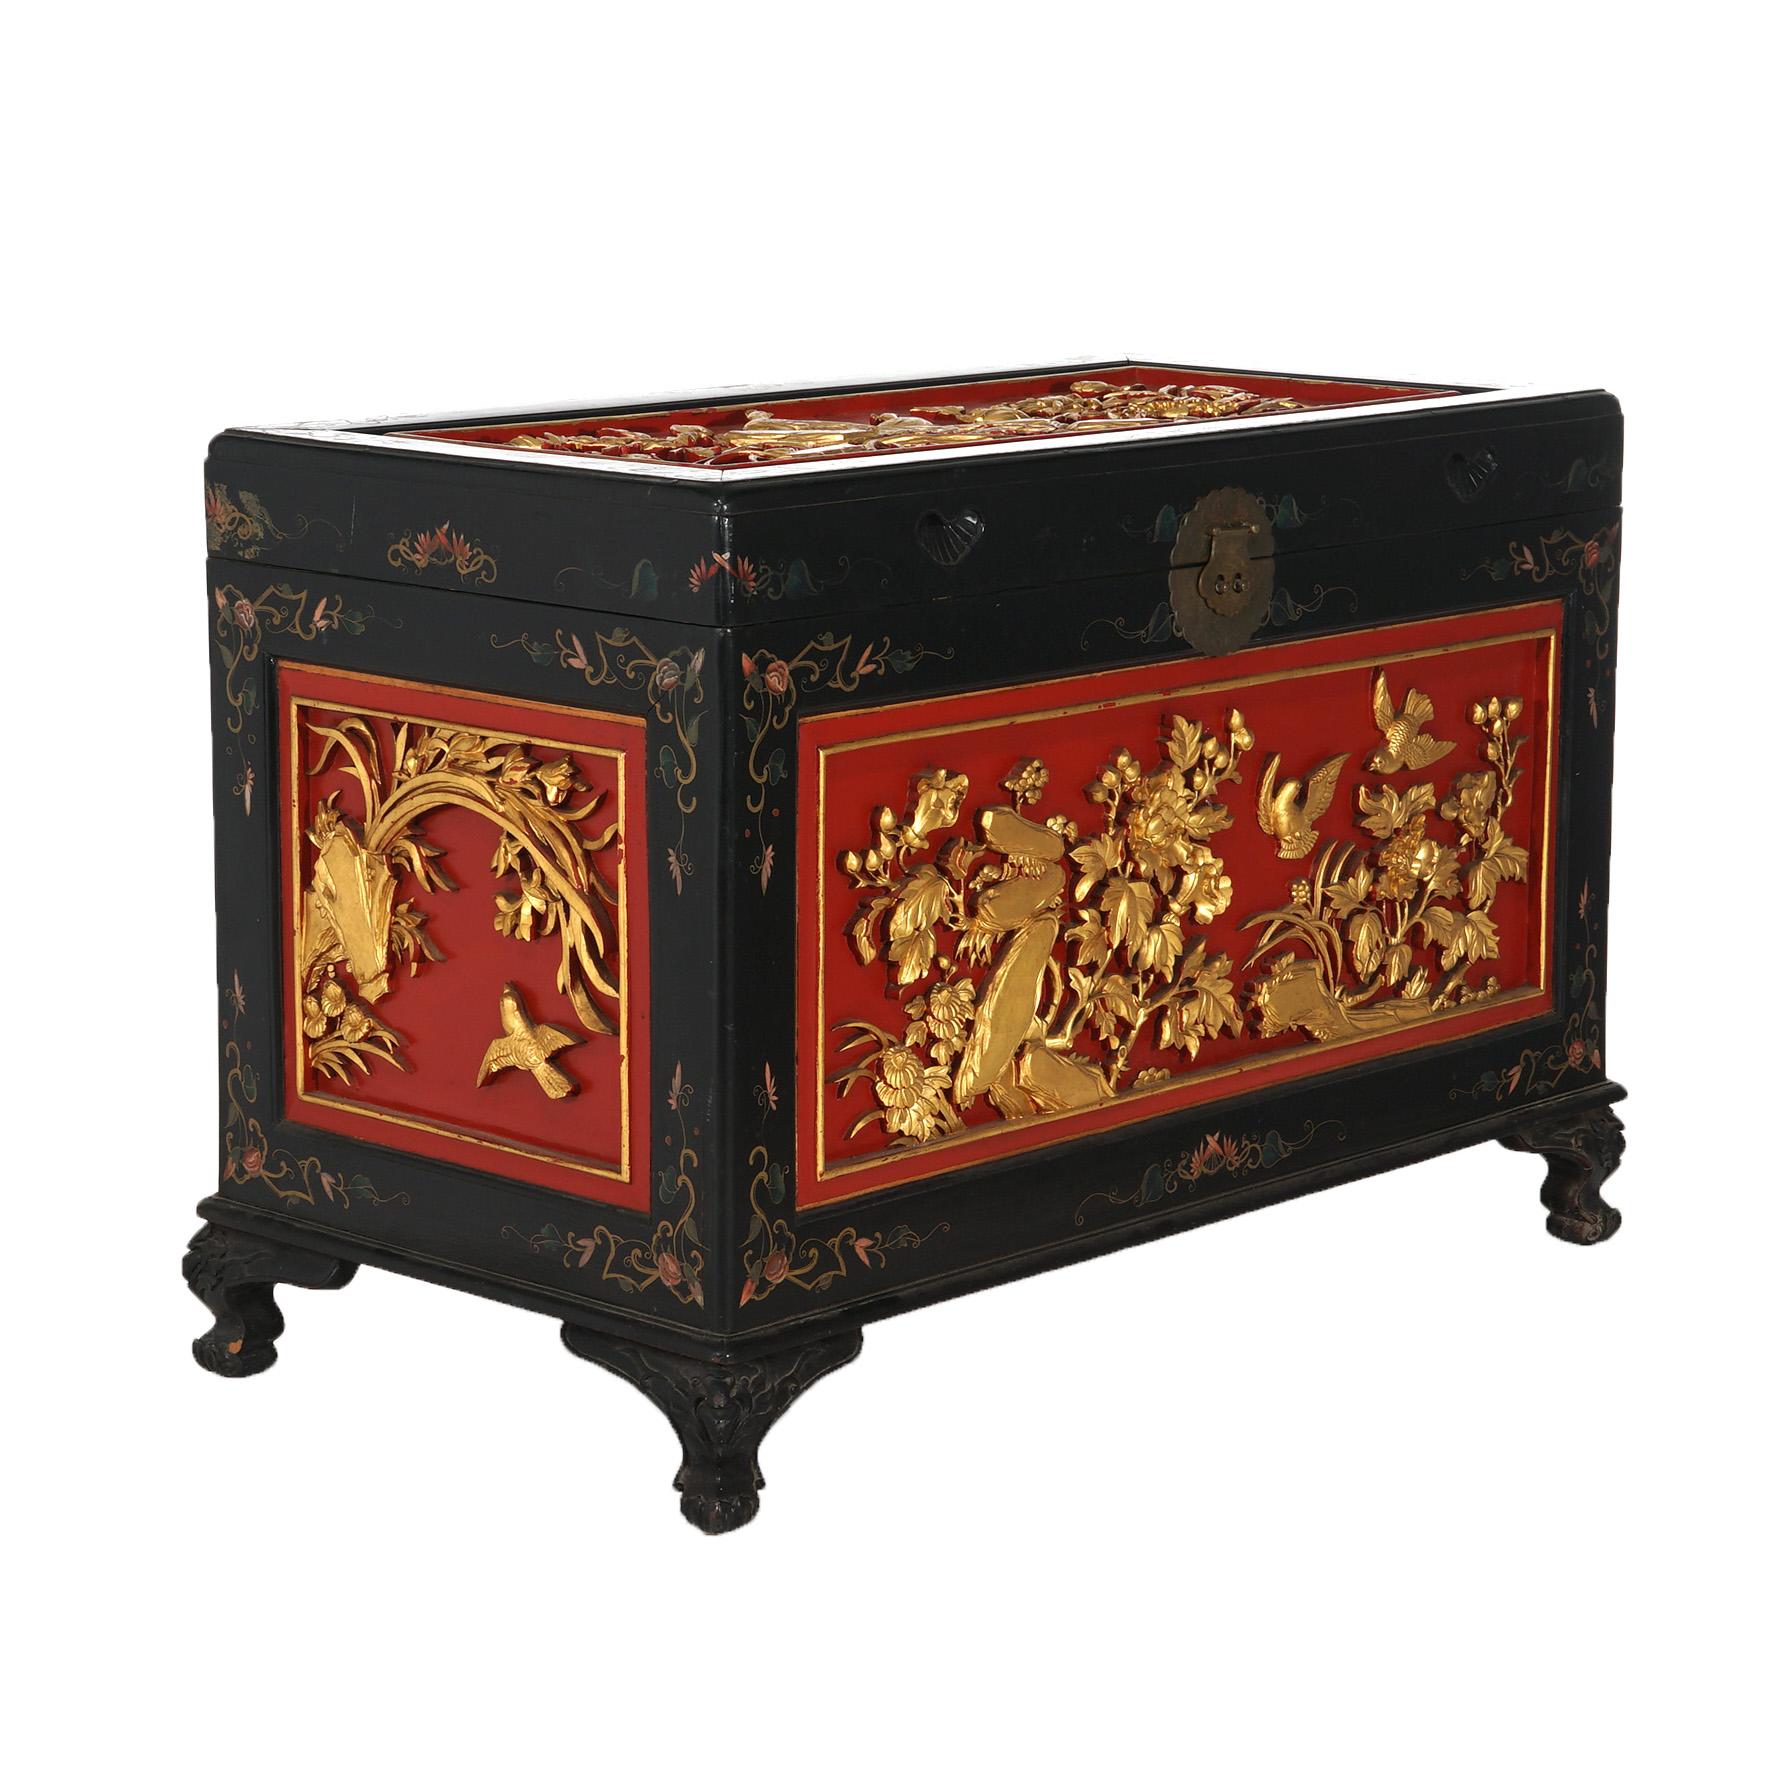 20th Century Antique Chinese Deeply Carved & Polychromed Gilt Blanket Chest with Birds C1920